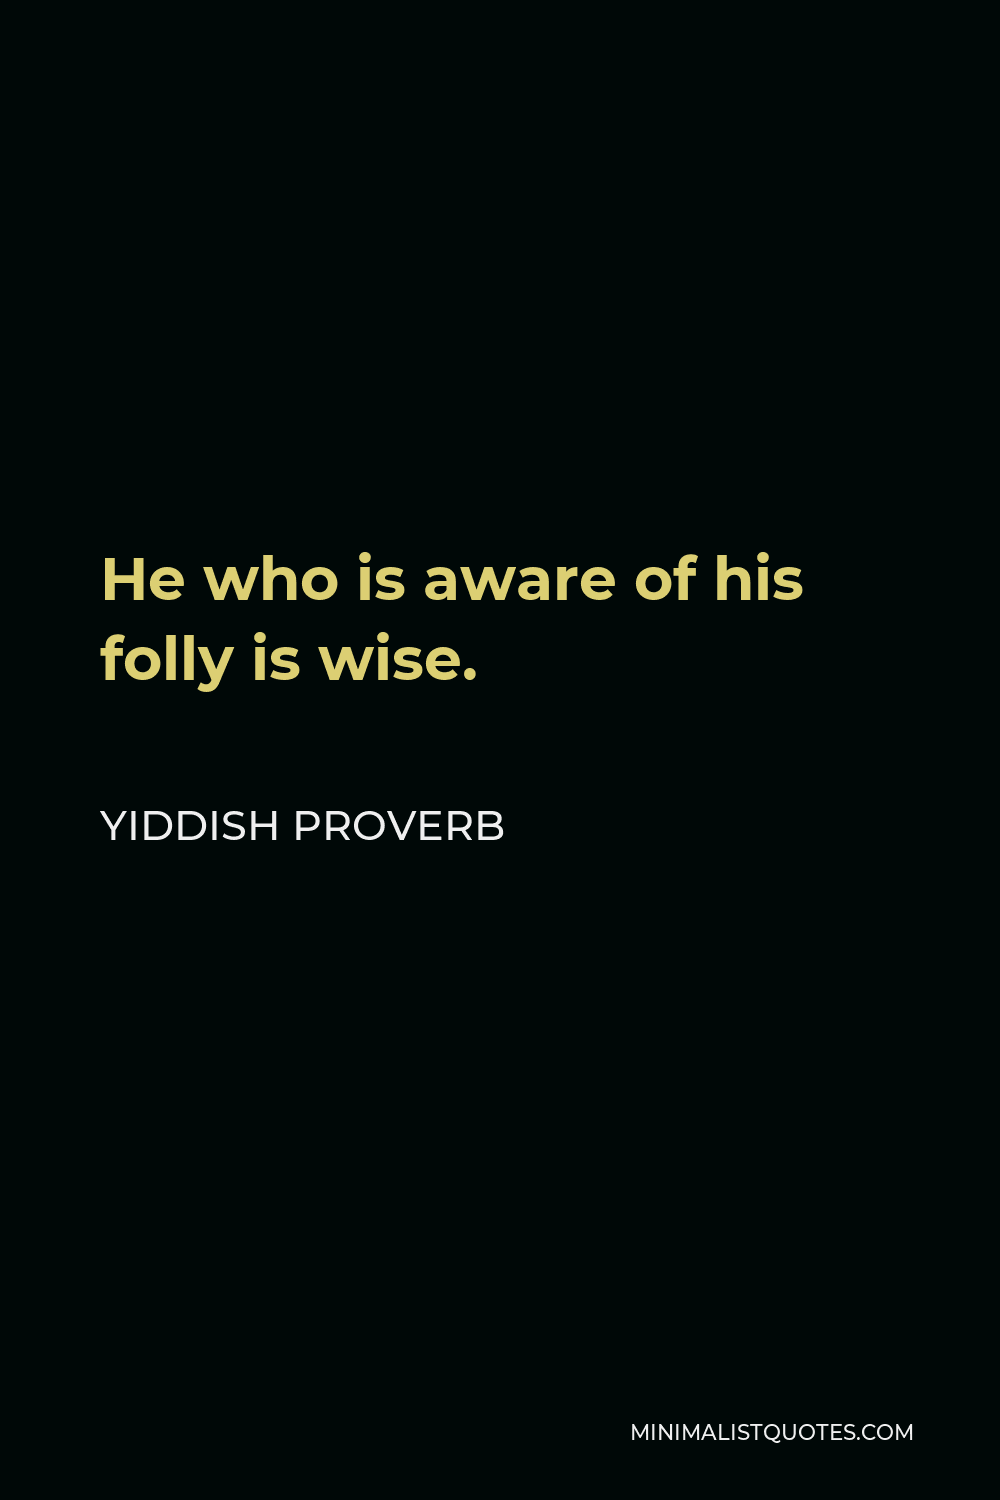 Yiddish Proverb Quote - He who is aware of his folly is wise.